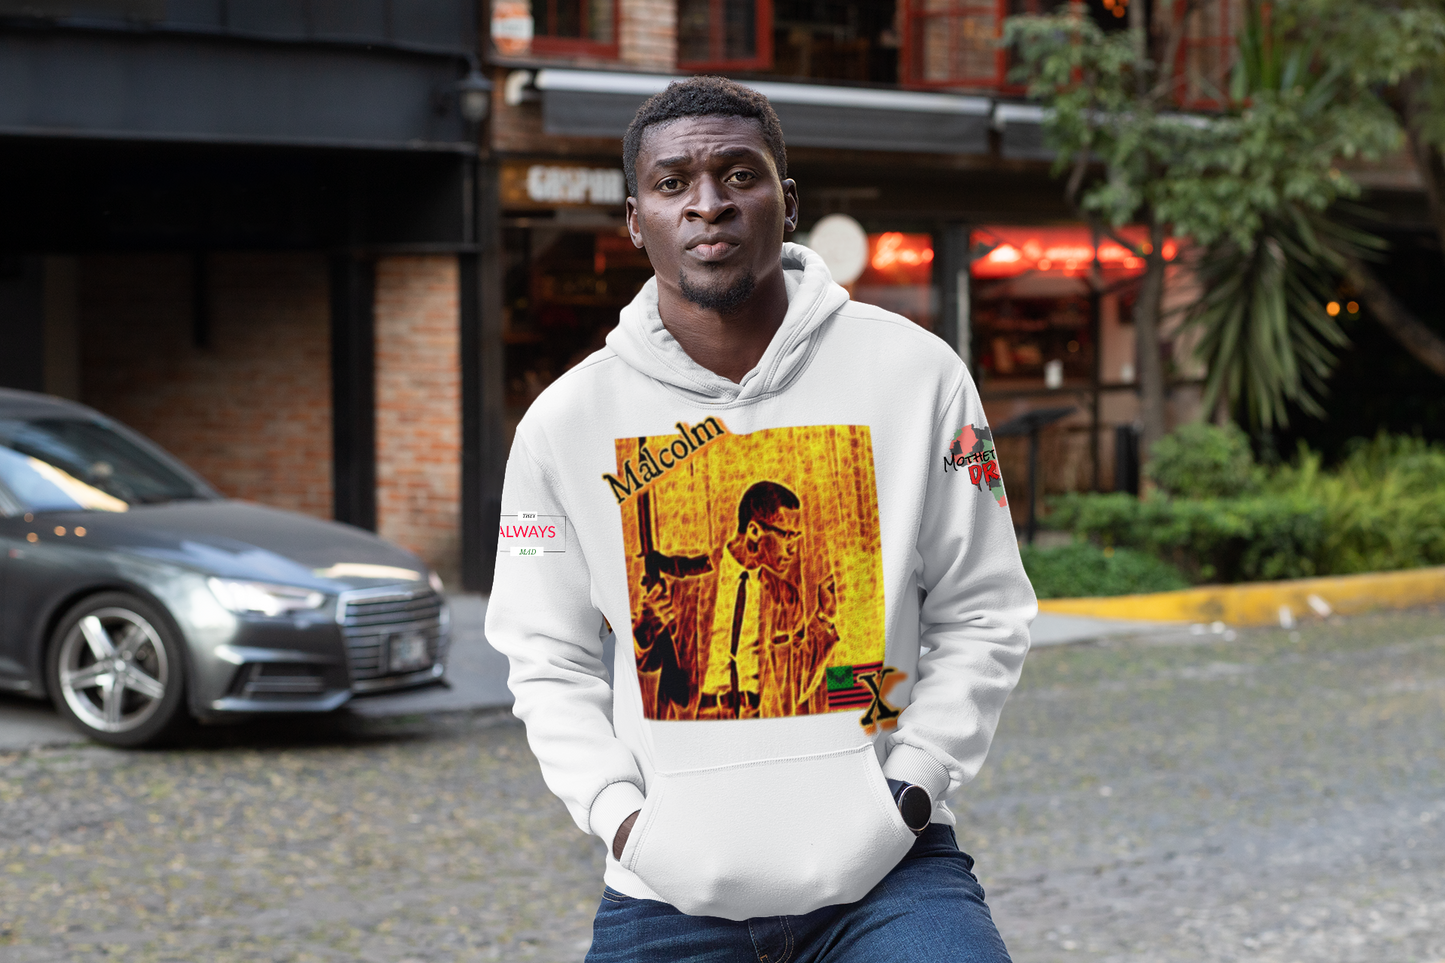 Malcolm X "Juneteenth 2020" The Quotes Men's Hoodie